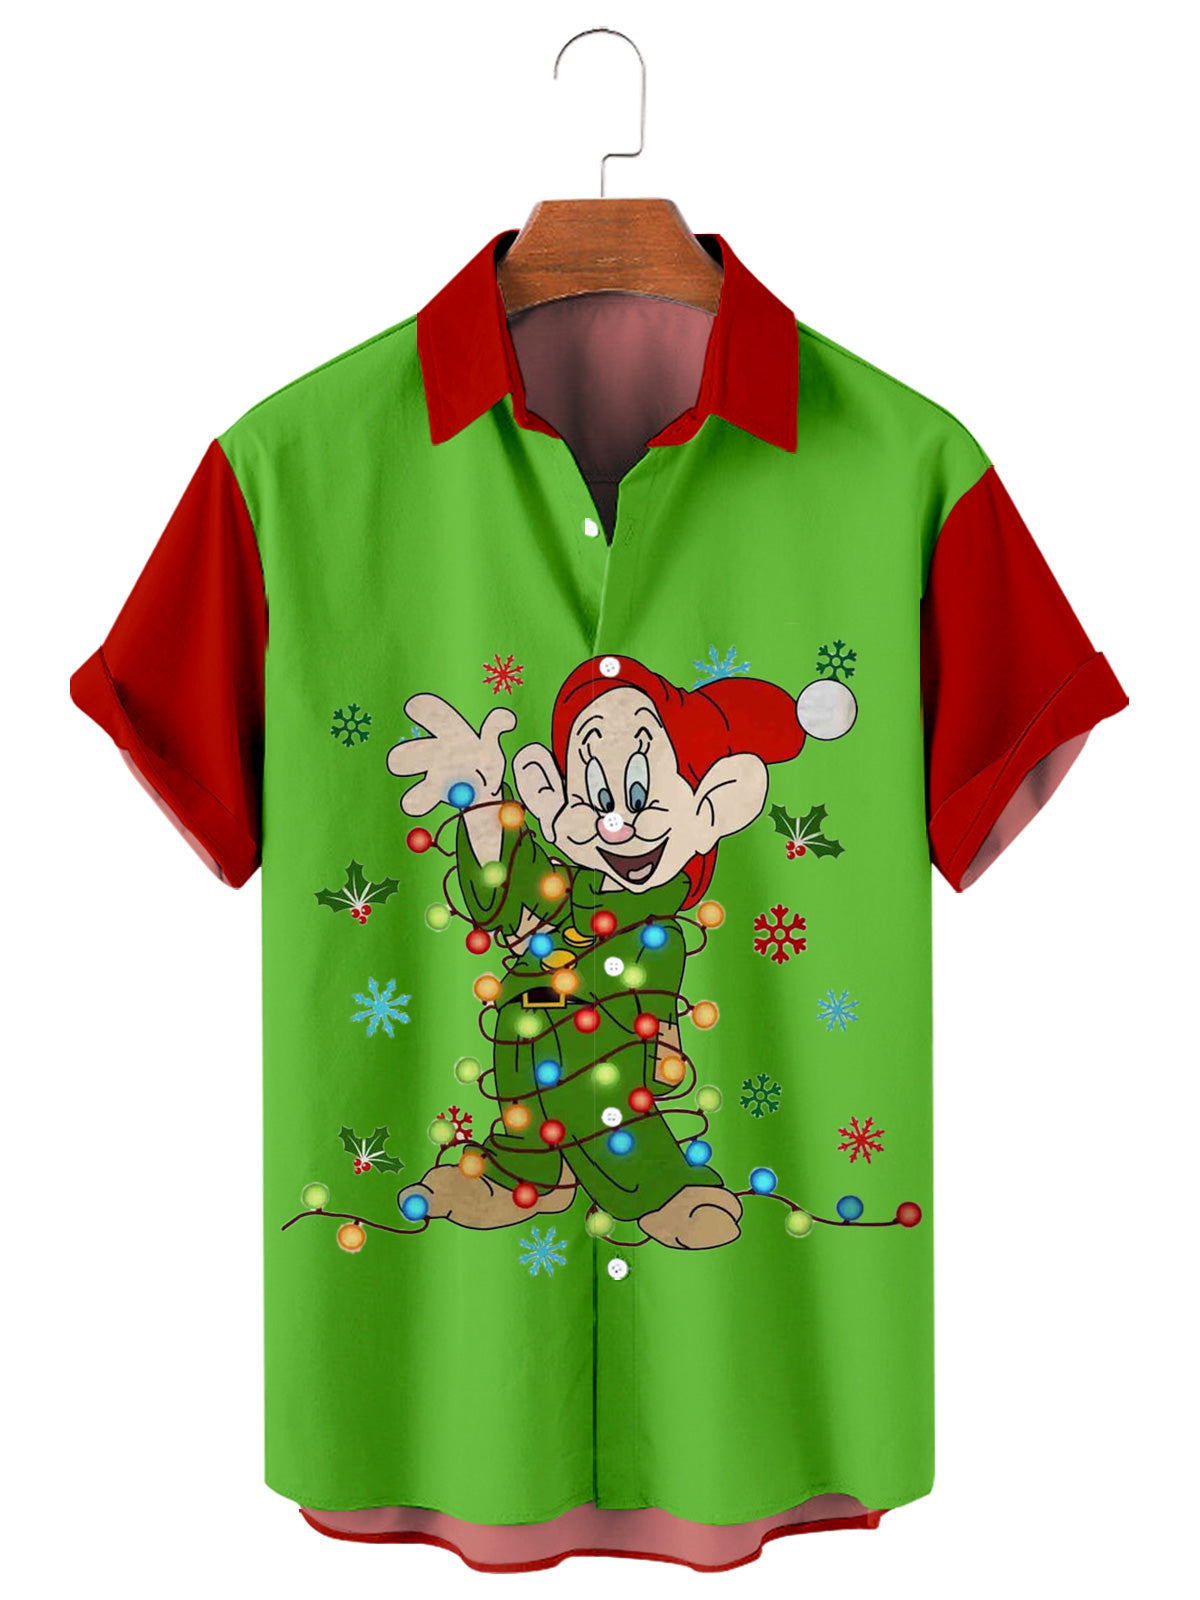 Men's Plus Size Limited Christmas Day Creative Design Pattern Shirt With Pockets PLUSCLOTHESMAN